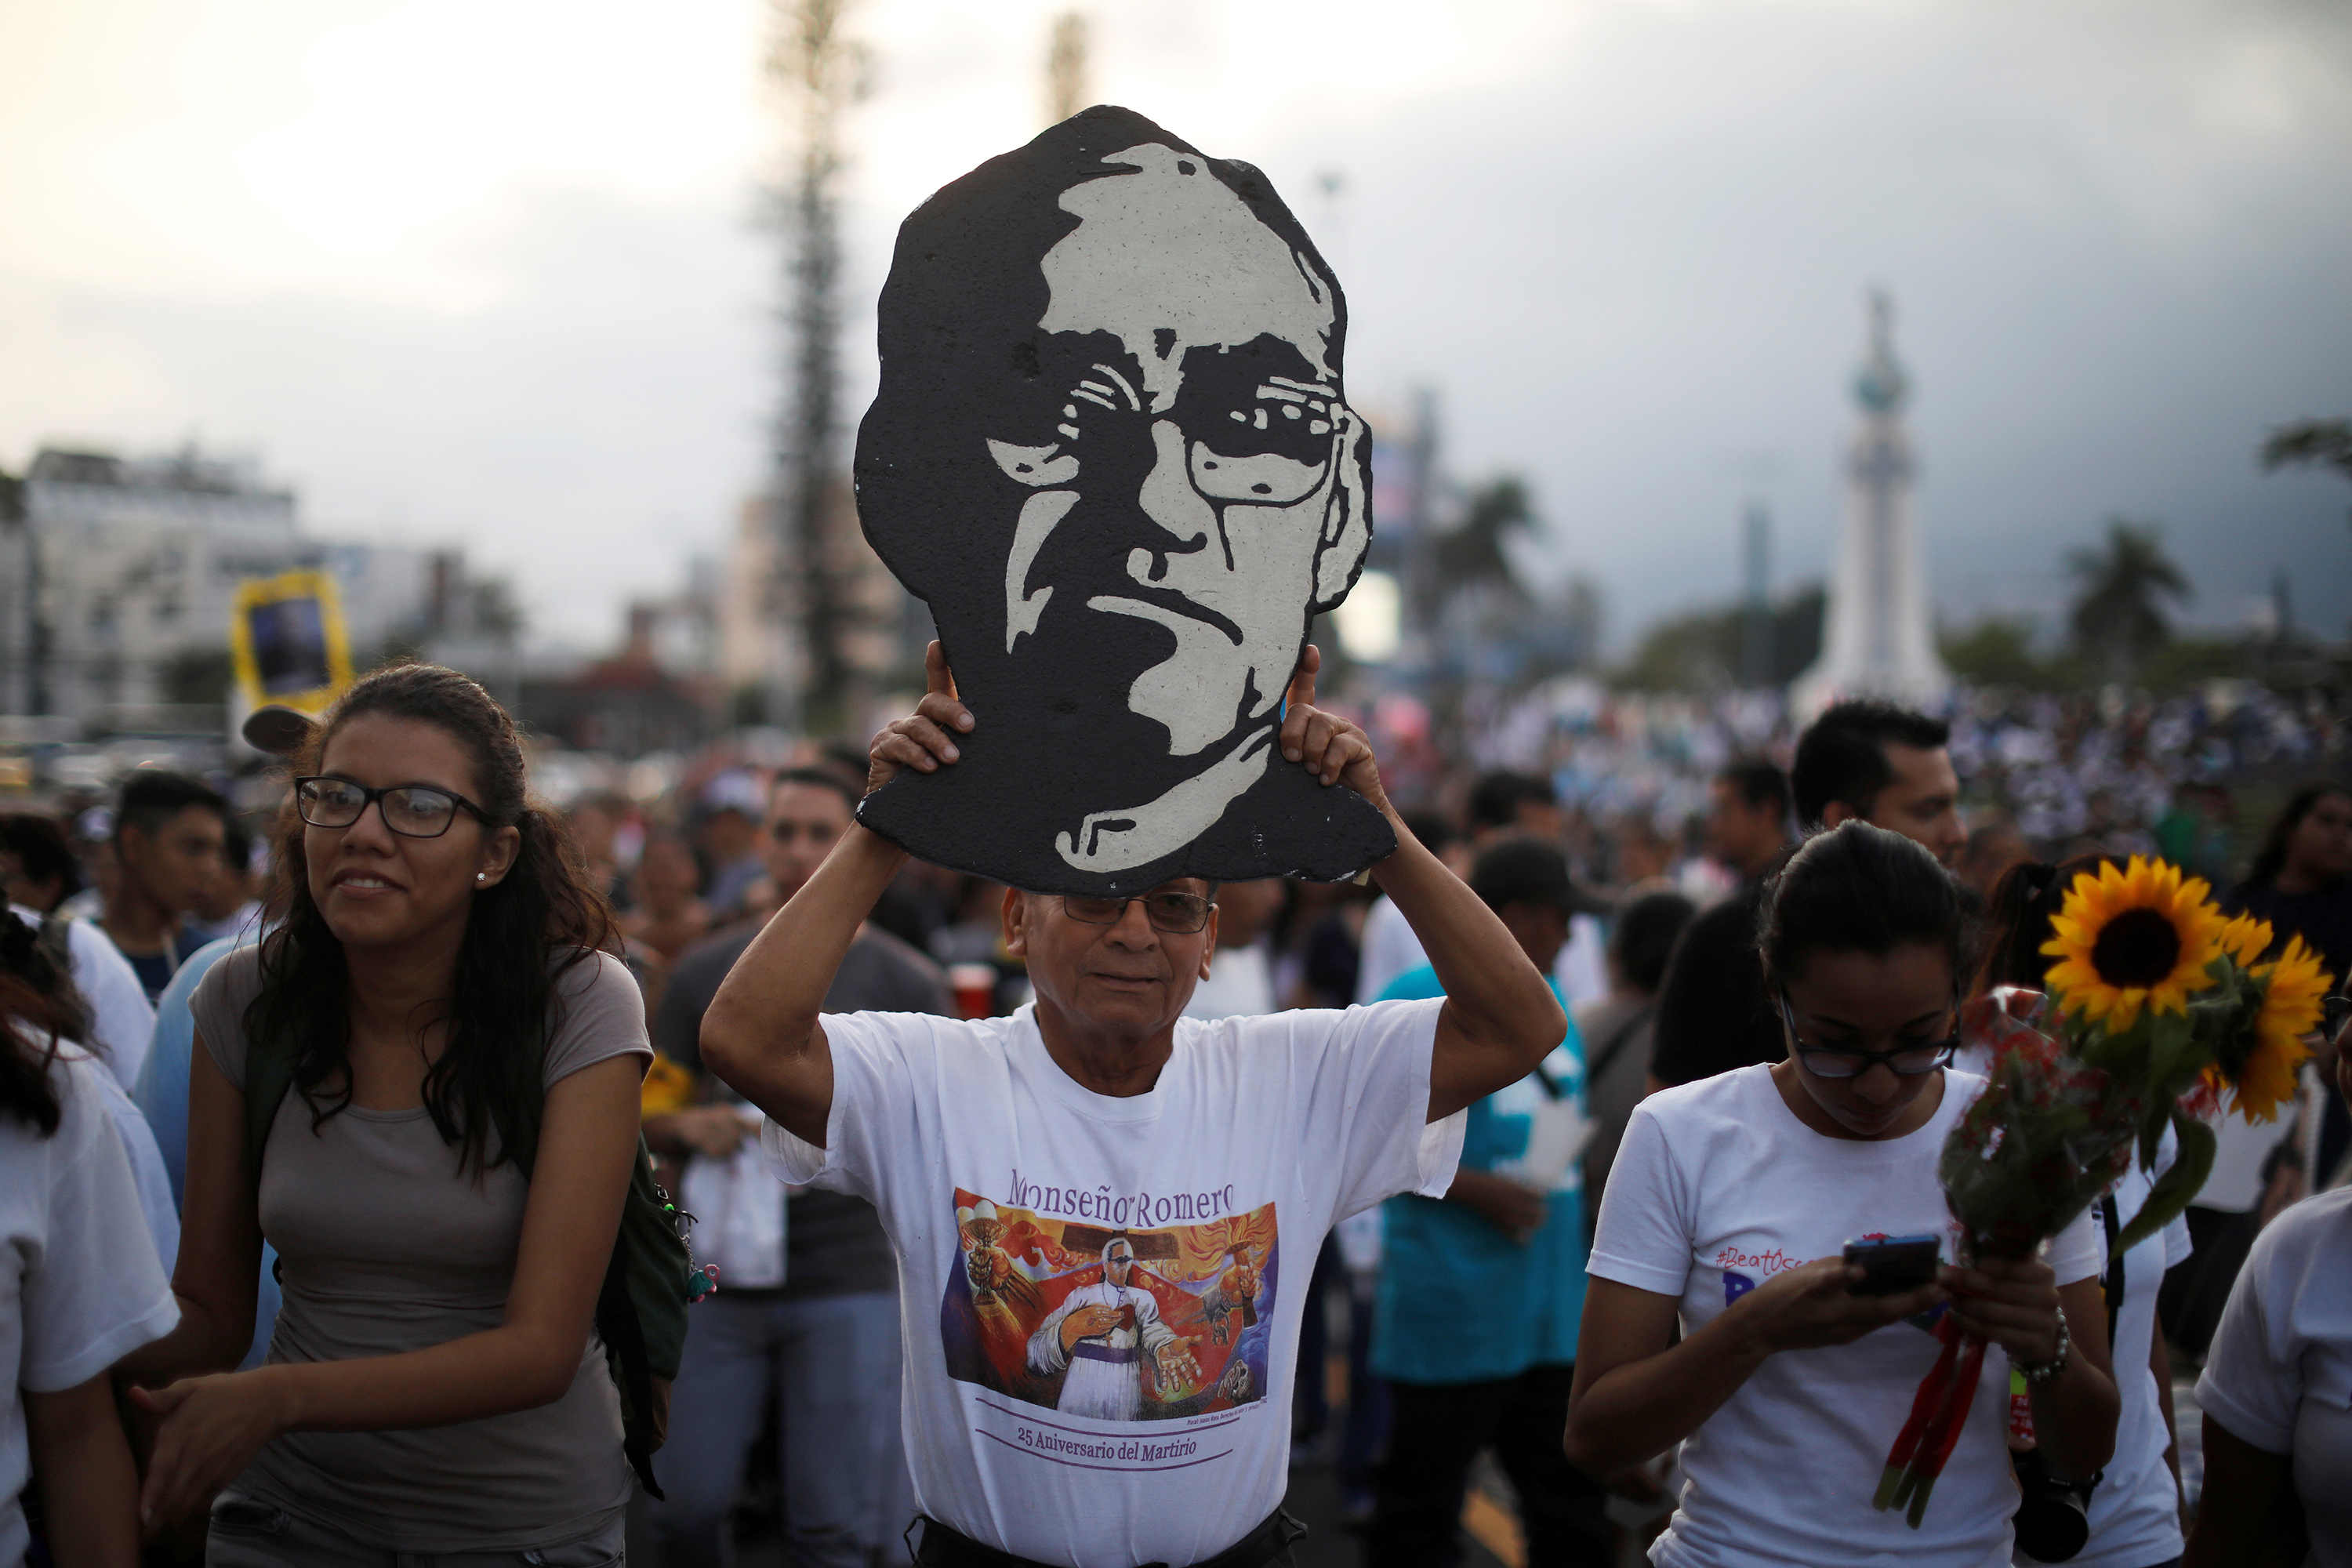 Romero is 'great guiding light' of Pope Francis